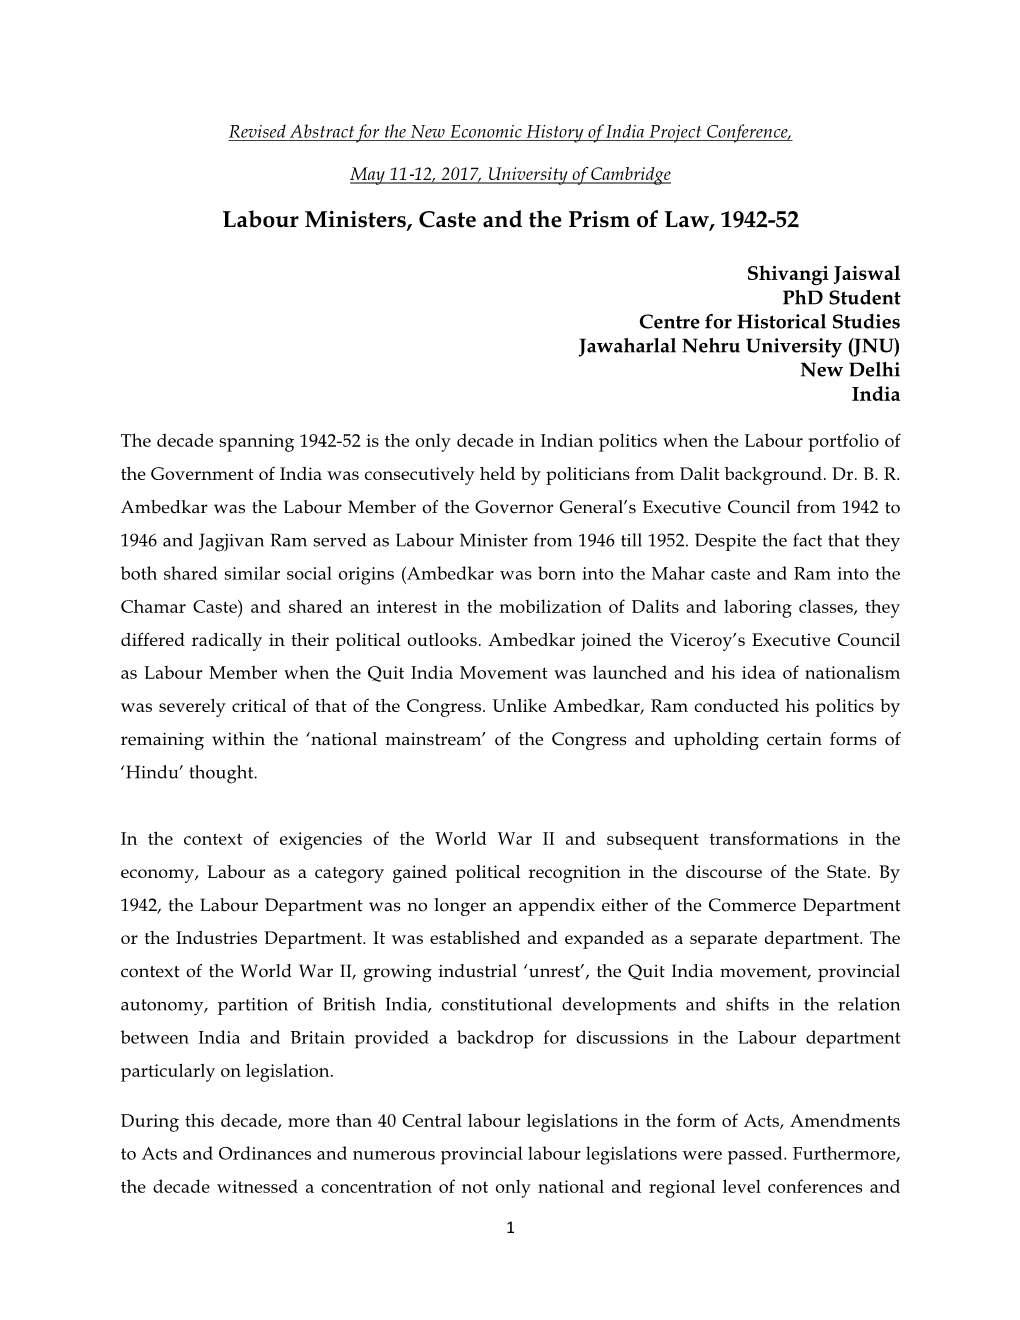 Labour Ministers, Caste and the Prism of Law, 1942-52